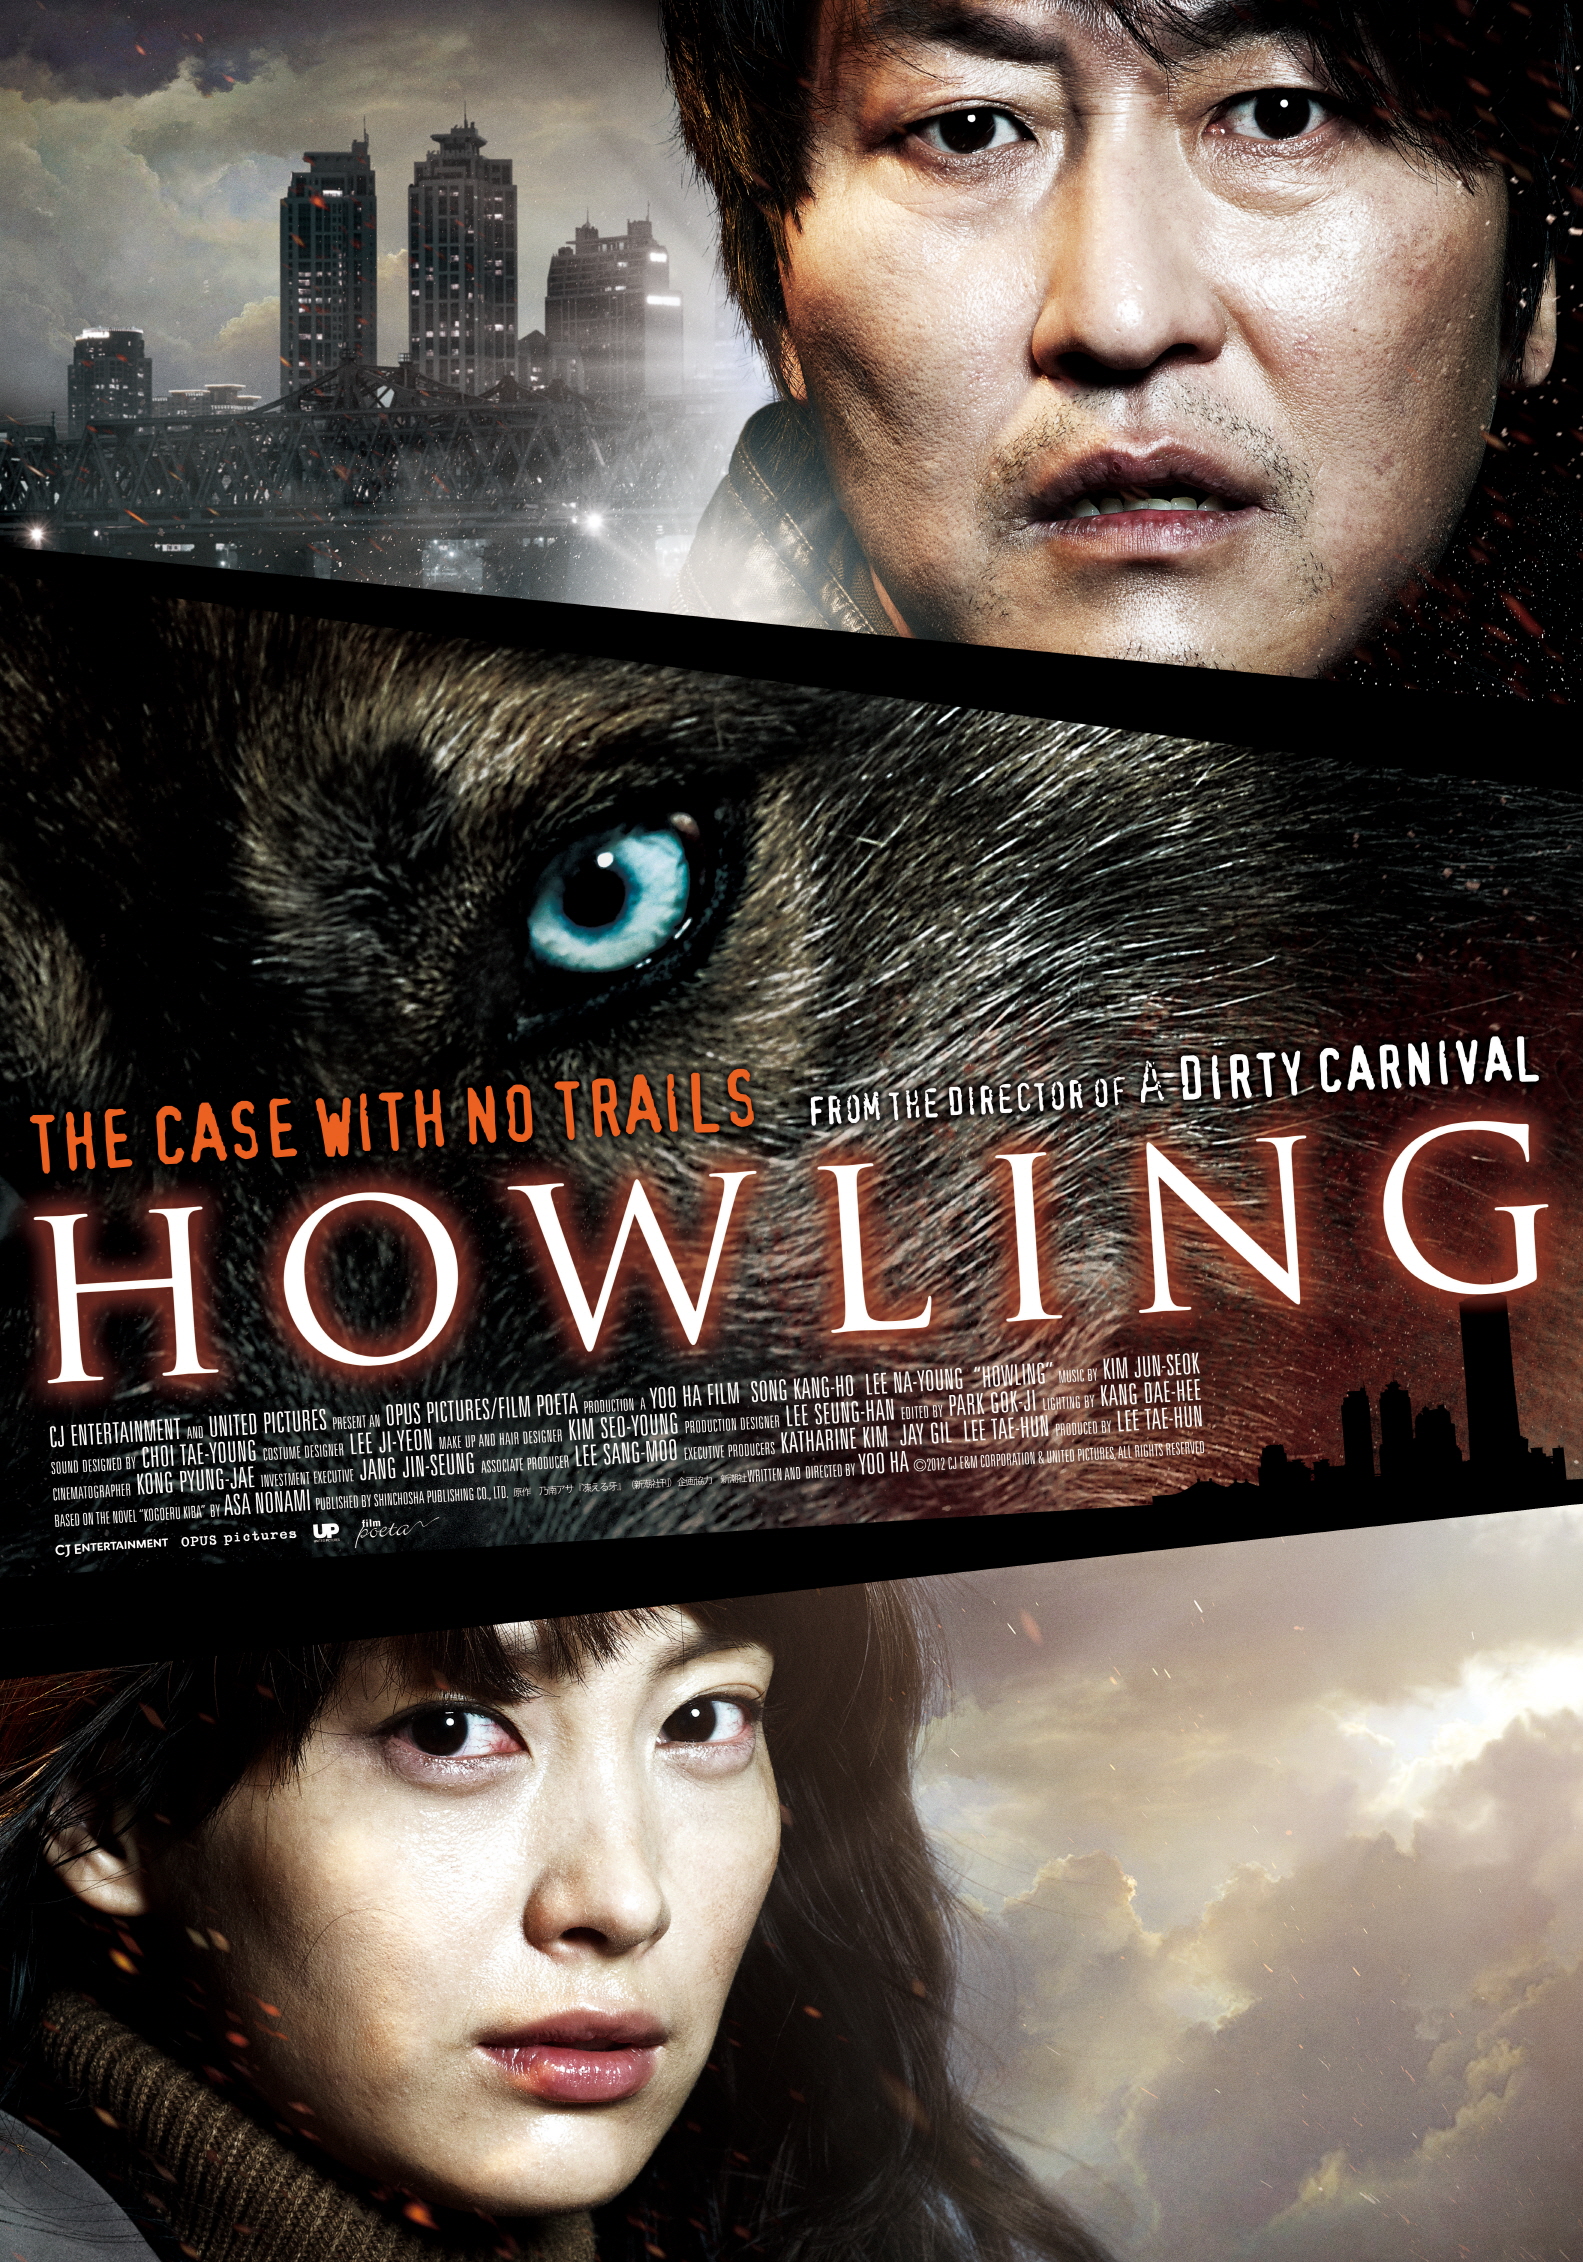 Howling (2012)